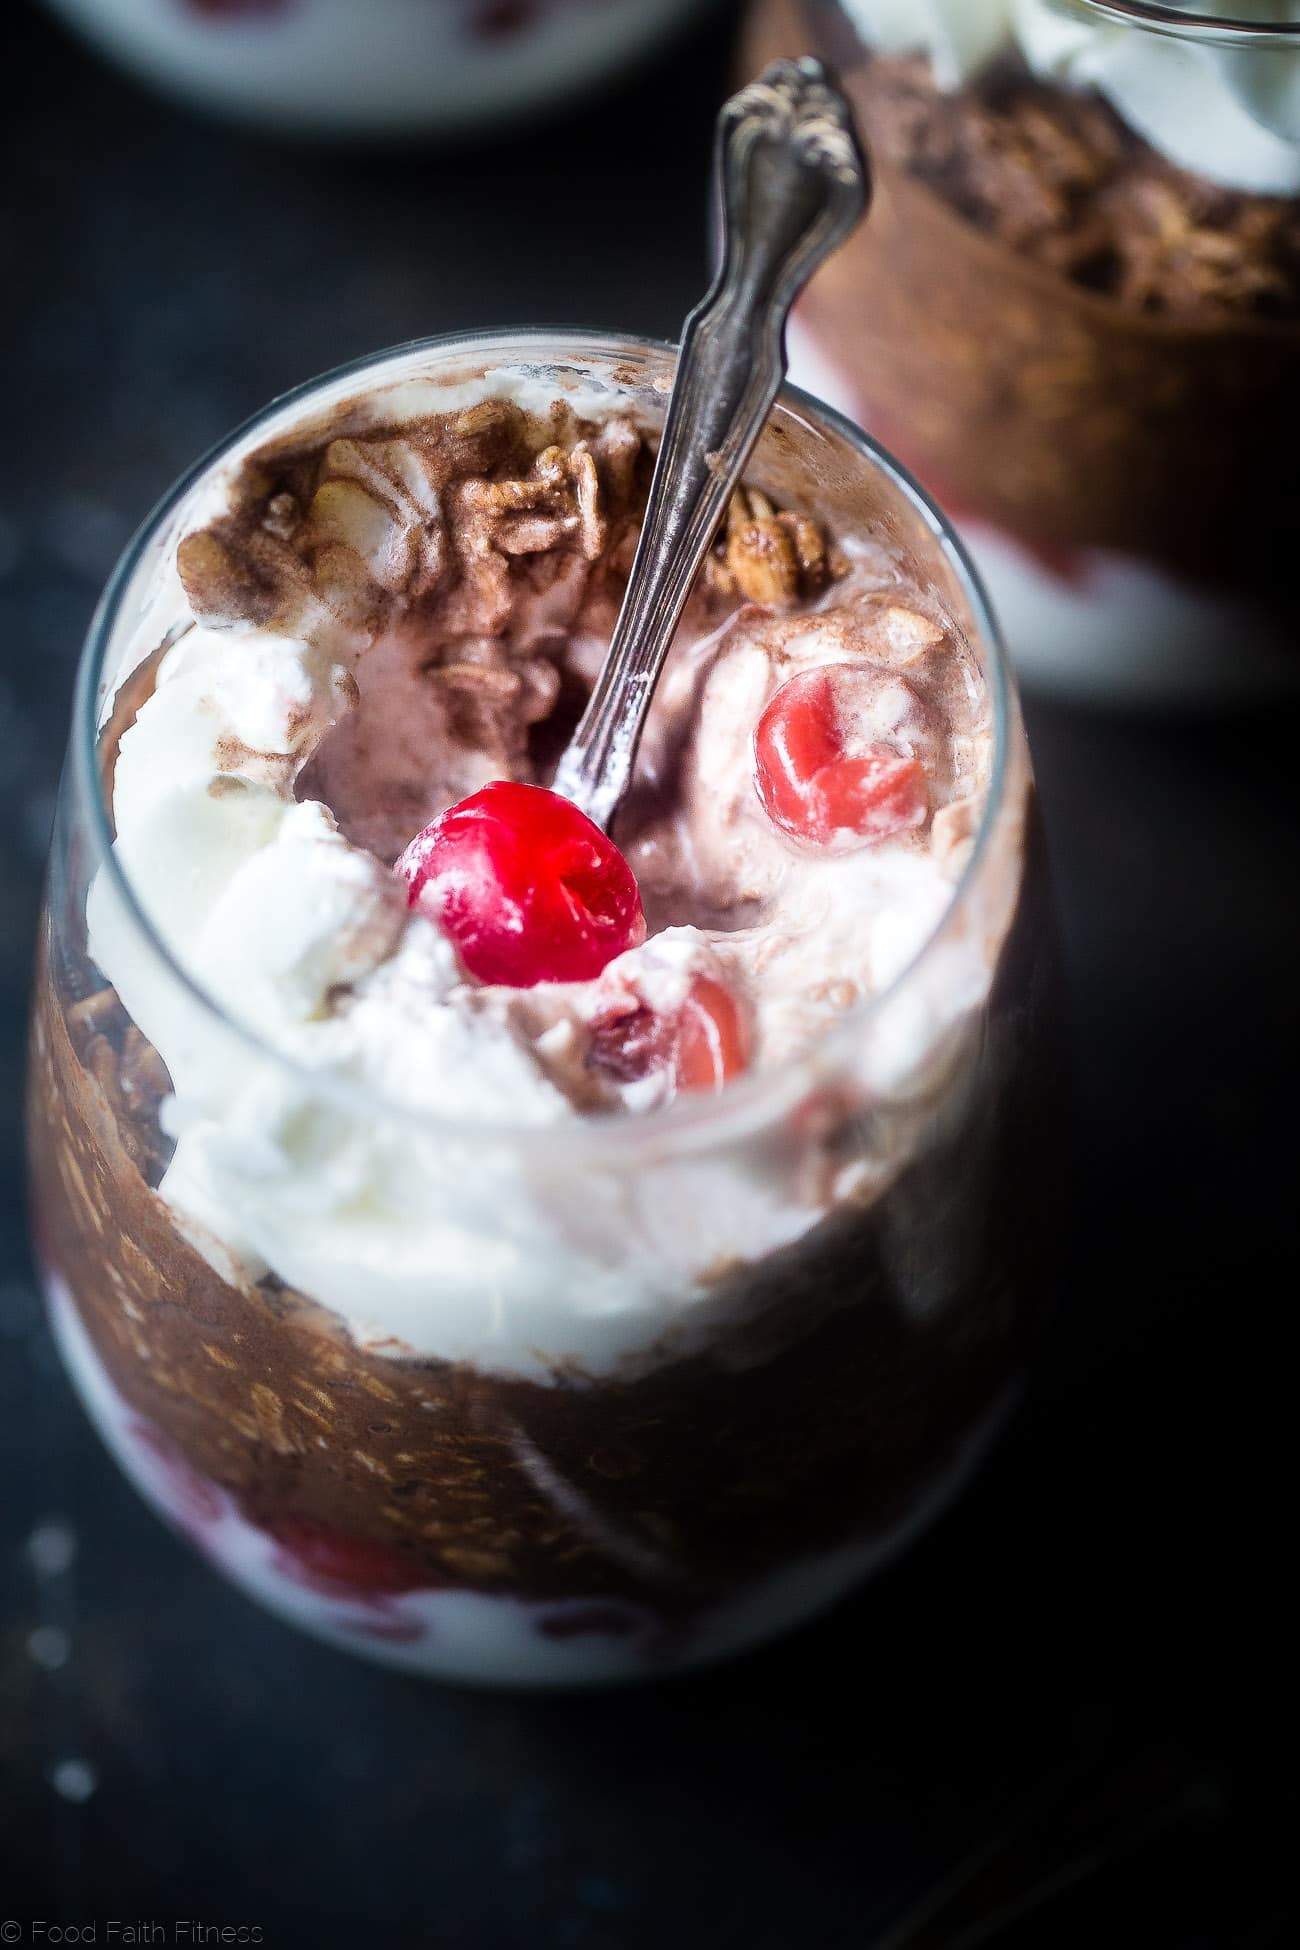 Black Forest Cake Overnight Oats - These 6 ingredient, quick and easy overnight oats have all the taste of the classic dessert in a healthy, gluten free and protein packed breakfast! | Foodfaithfitness.com | @FoodFaithFit